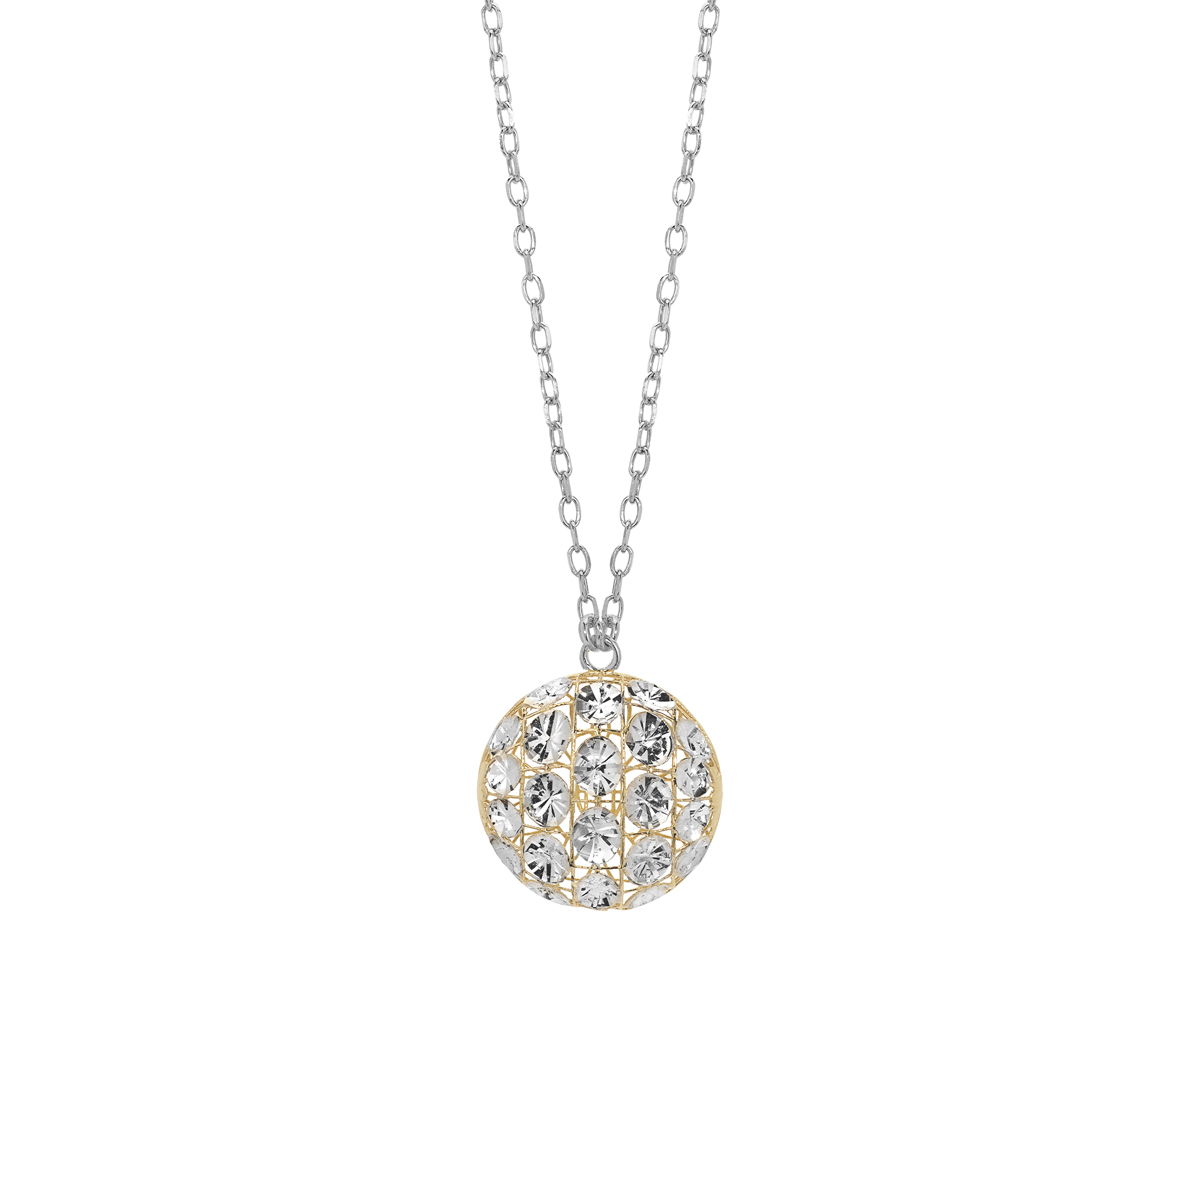 Diamond Effect Rhodium-Plated Silver Necklace